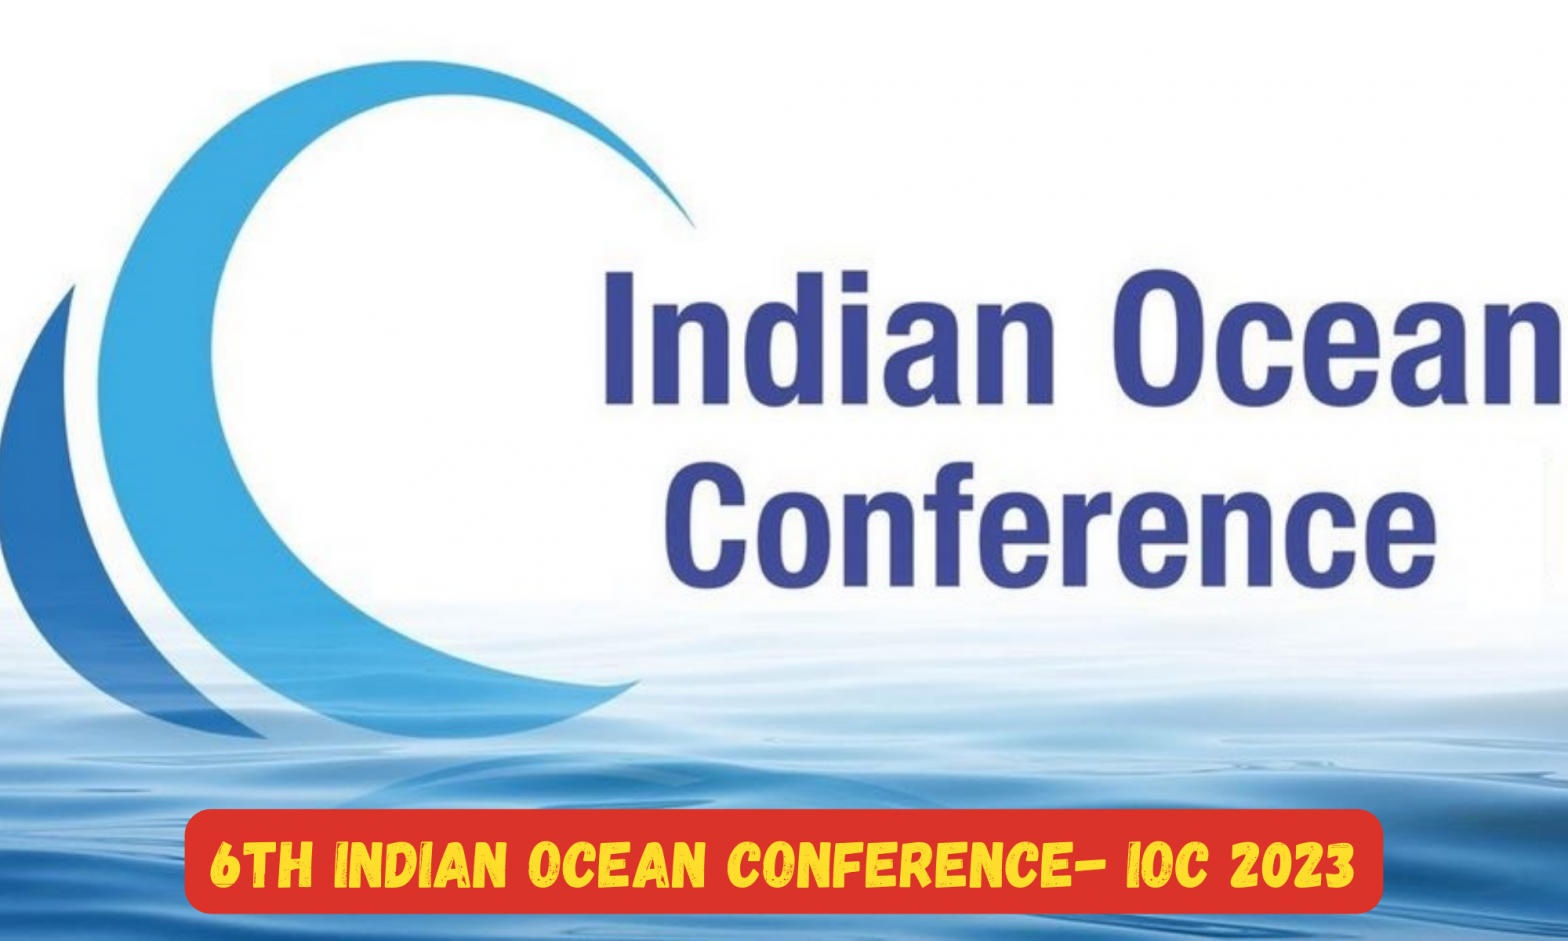 6th Indian Ocean Conference- IOC 2023